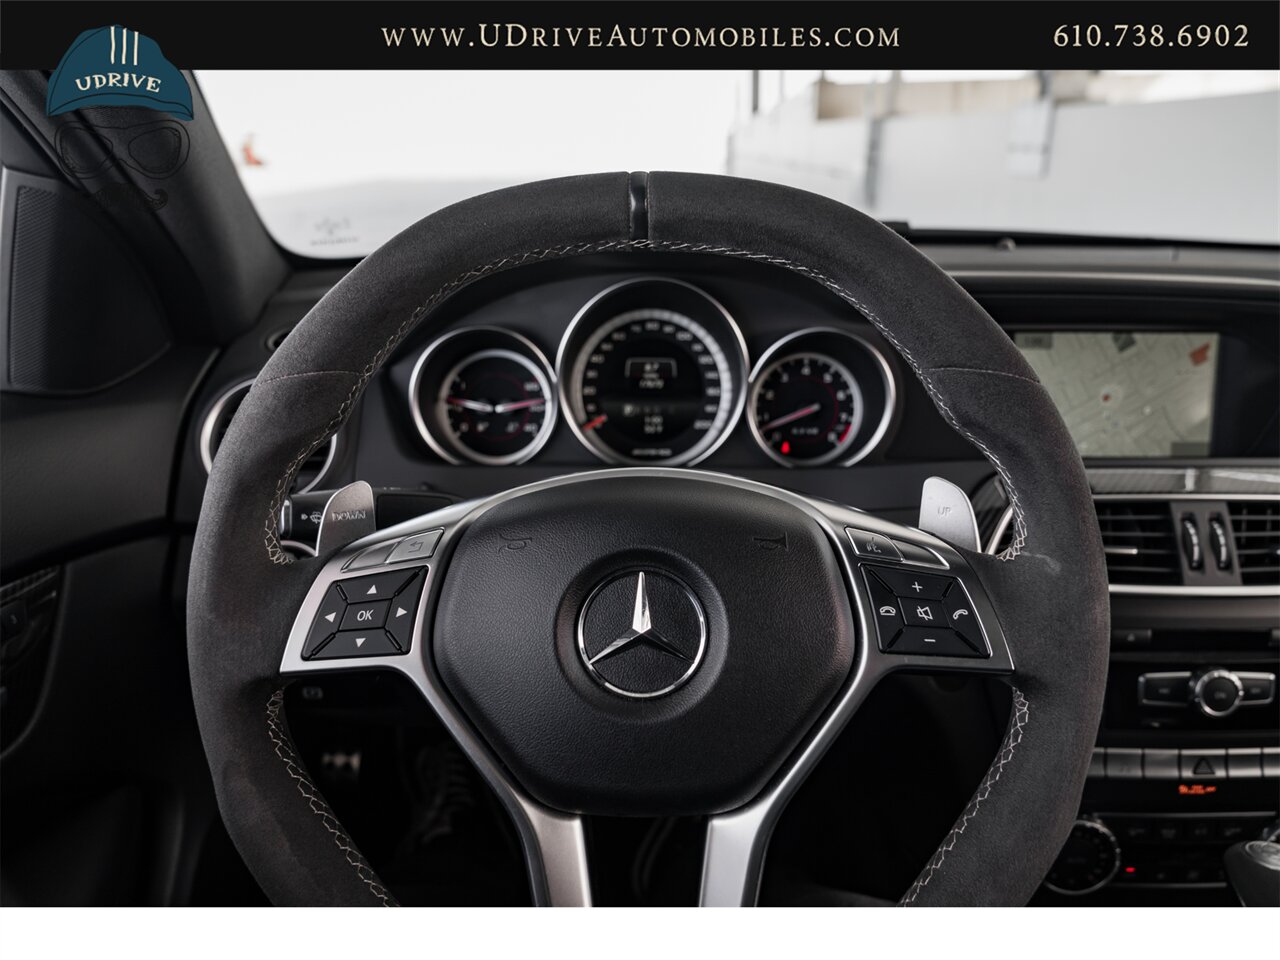 2015 Mercedes-Benz C63 AMG  Edition 507 17k Miles Pano Sunroof Locking Diff 507hp - Photo 33 - West Chester, PA 19382